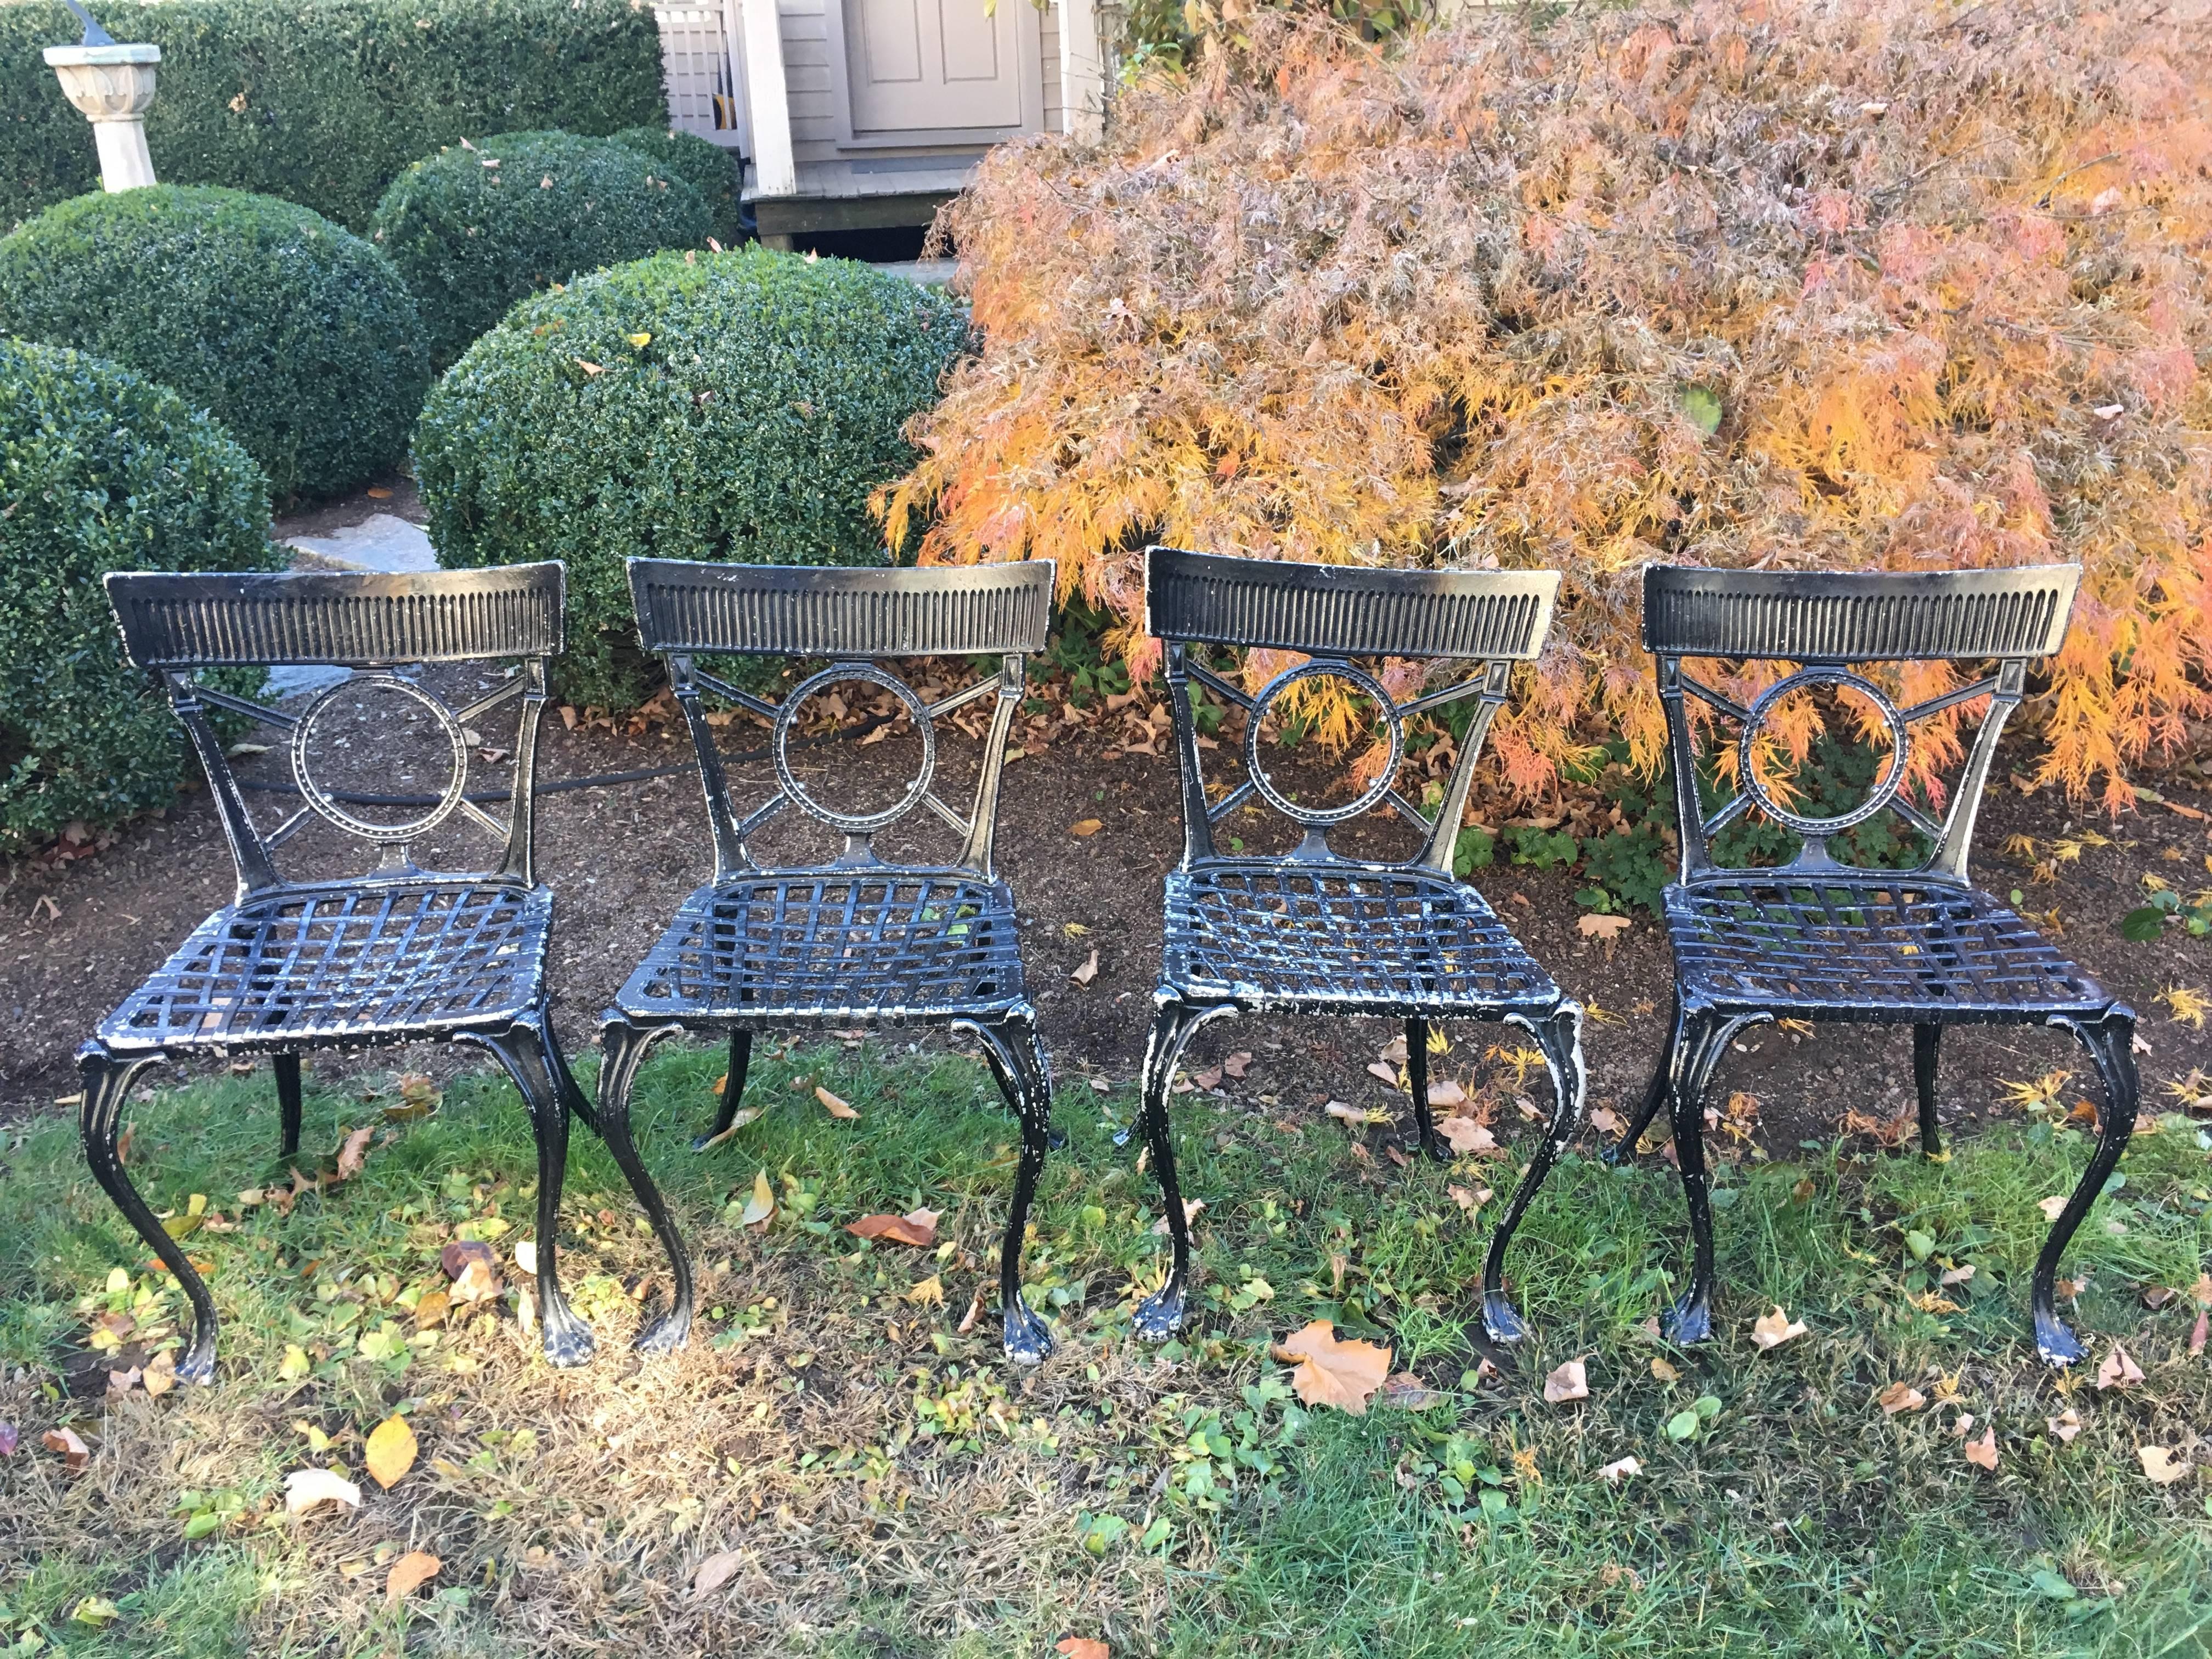 What a find! We scored 16 of these decorative Klismos-style chairs in chippy black paint. Extremely comfortable, even without cushions, they can be left as is, sandblasted and clear-coated for a dark silver finish or repainted to your custom